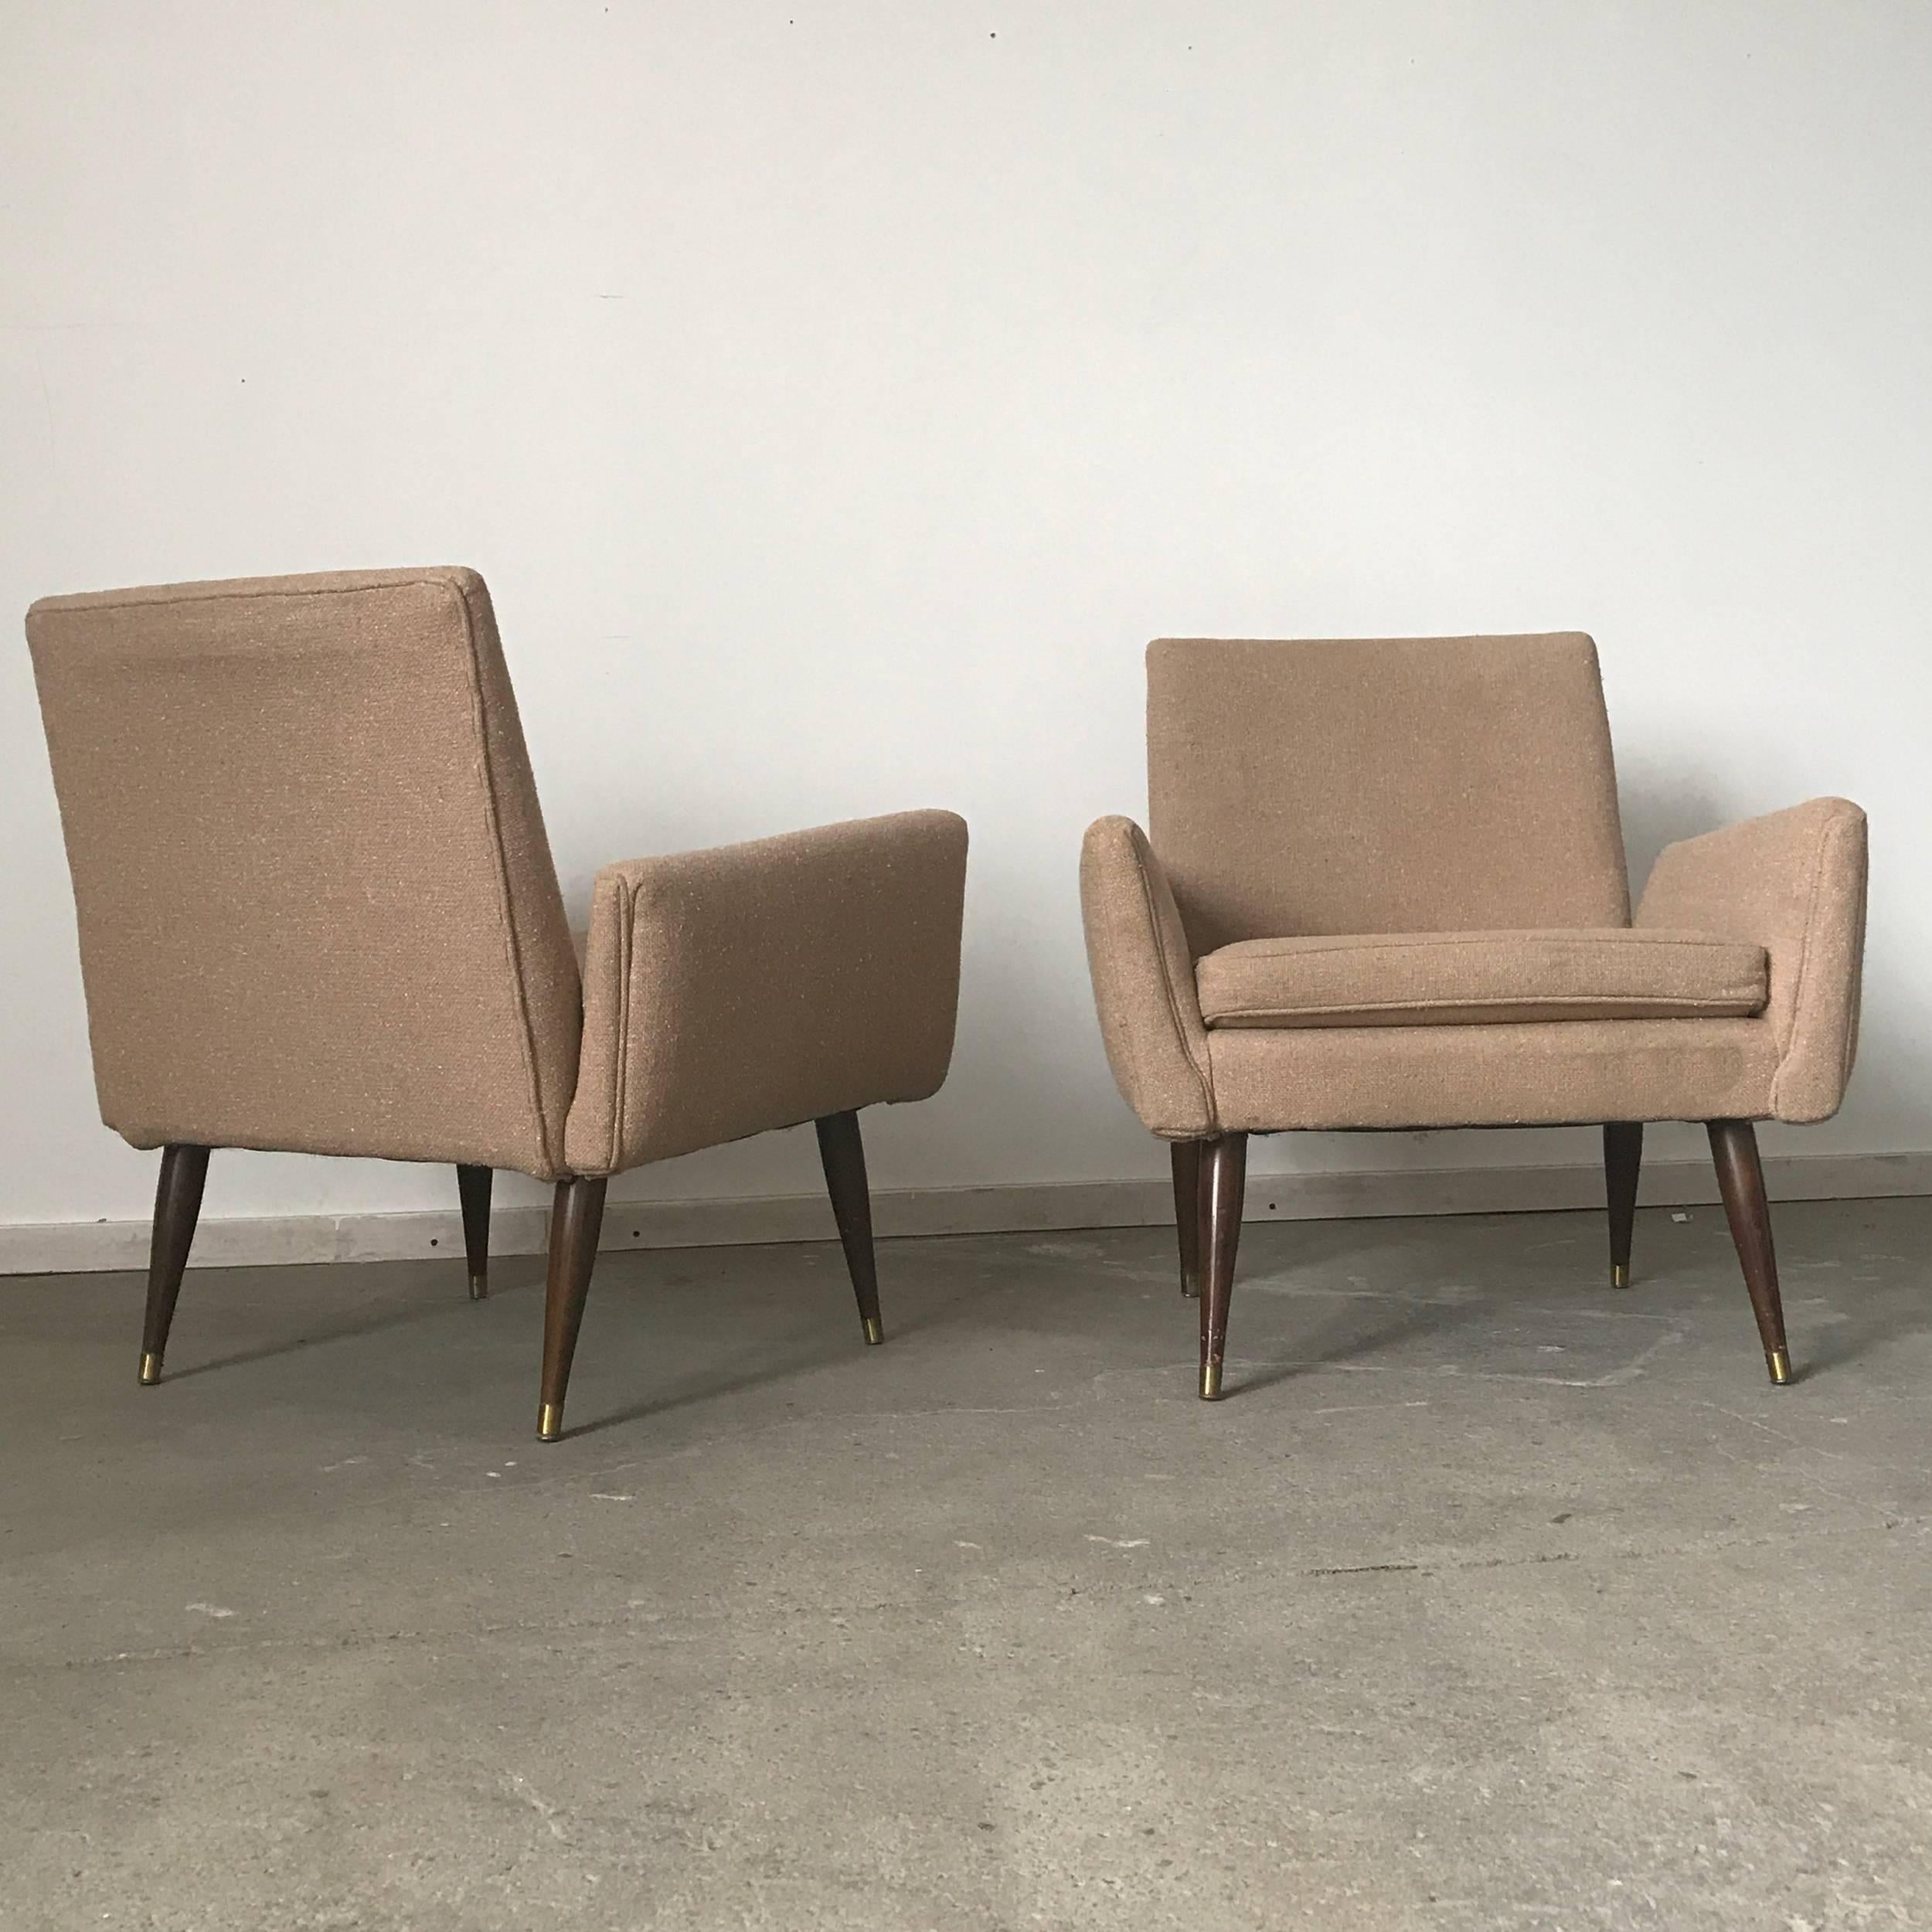 American Pair of Midcentury Structural Lounge Chairs in the Manner of Paul McCobb